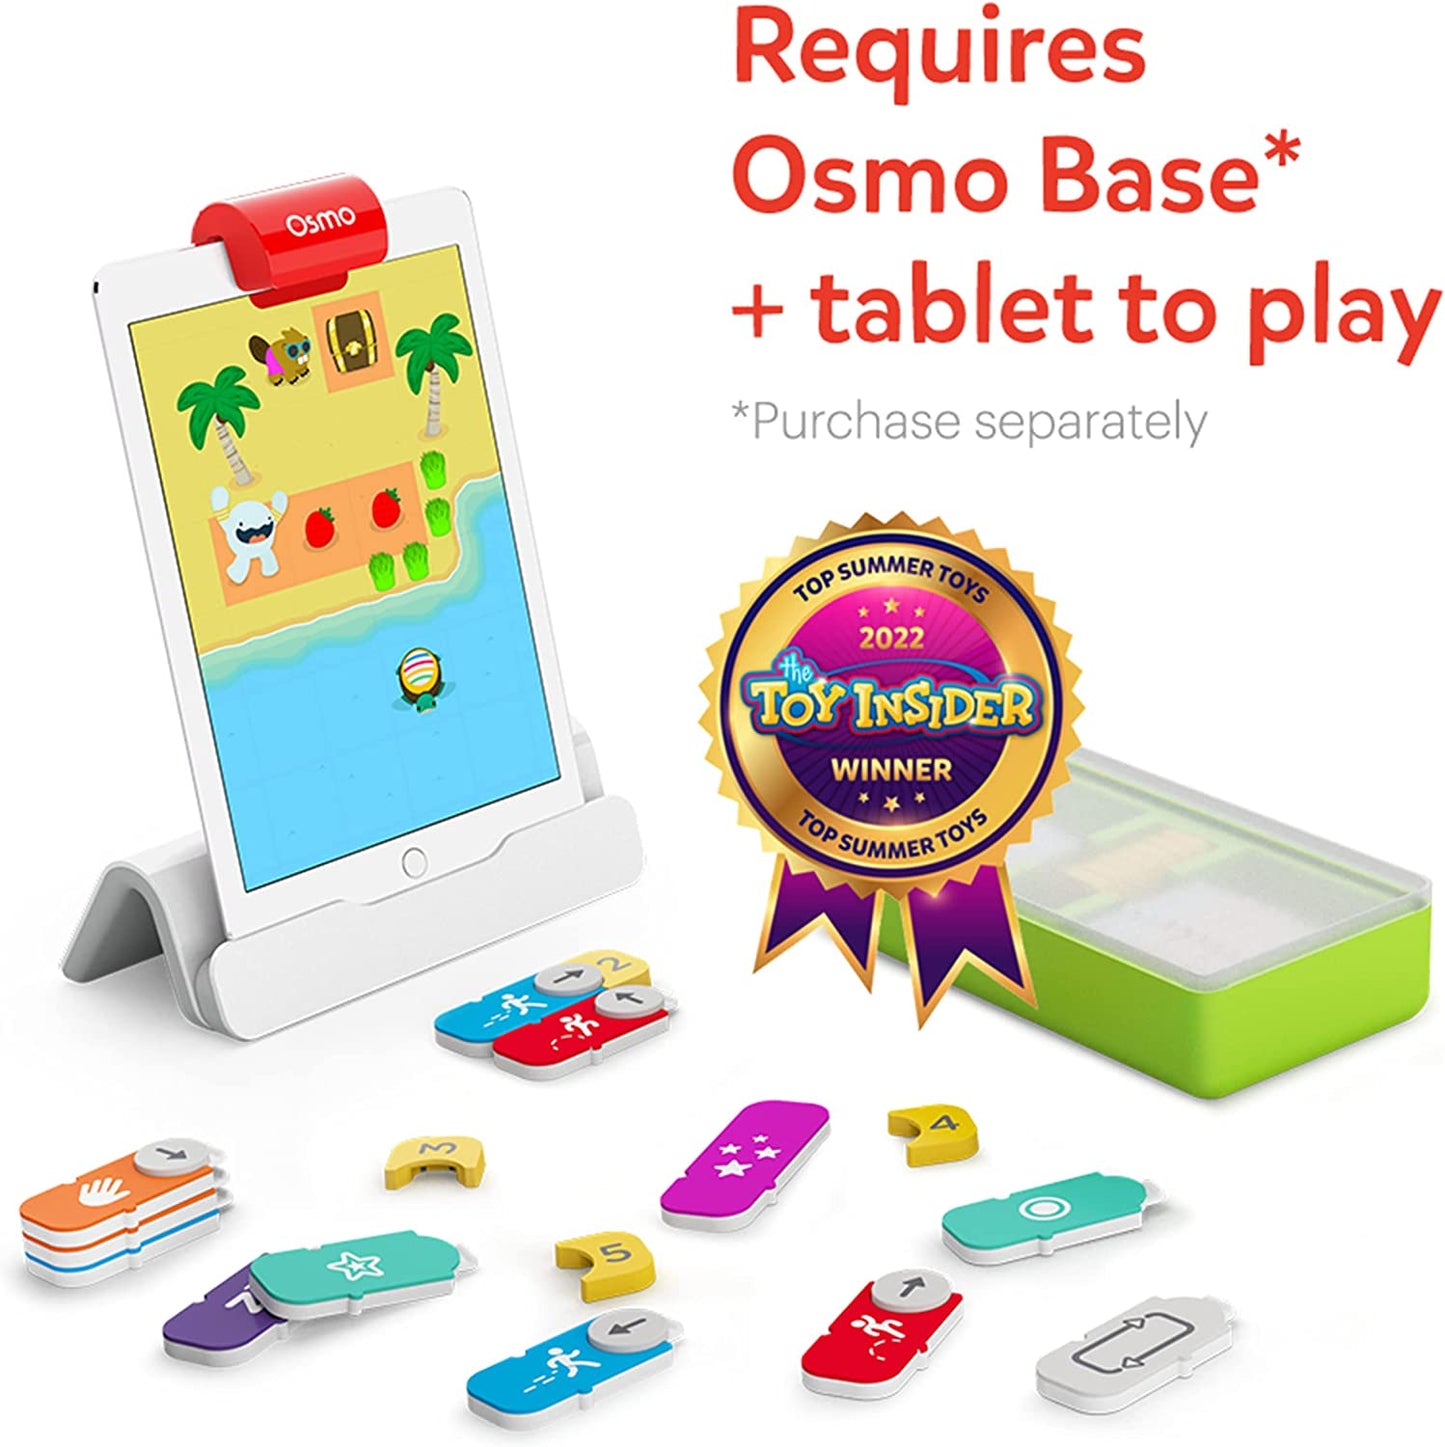 Coding Family Bundle for iPhone, iPad & Fire Tablet - 3 Educational Learning Games - Ages 5-10+ - Coding Jam, Coding Awbie, Coding Duo - STEM Toy ( Base Required) (Amazon Exclusive)